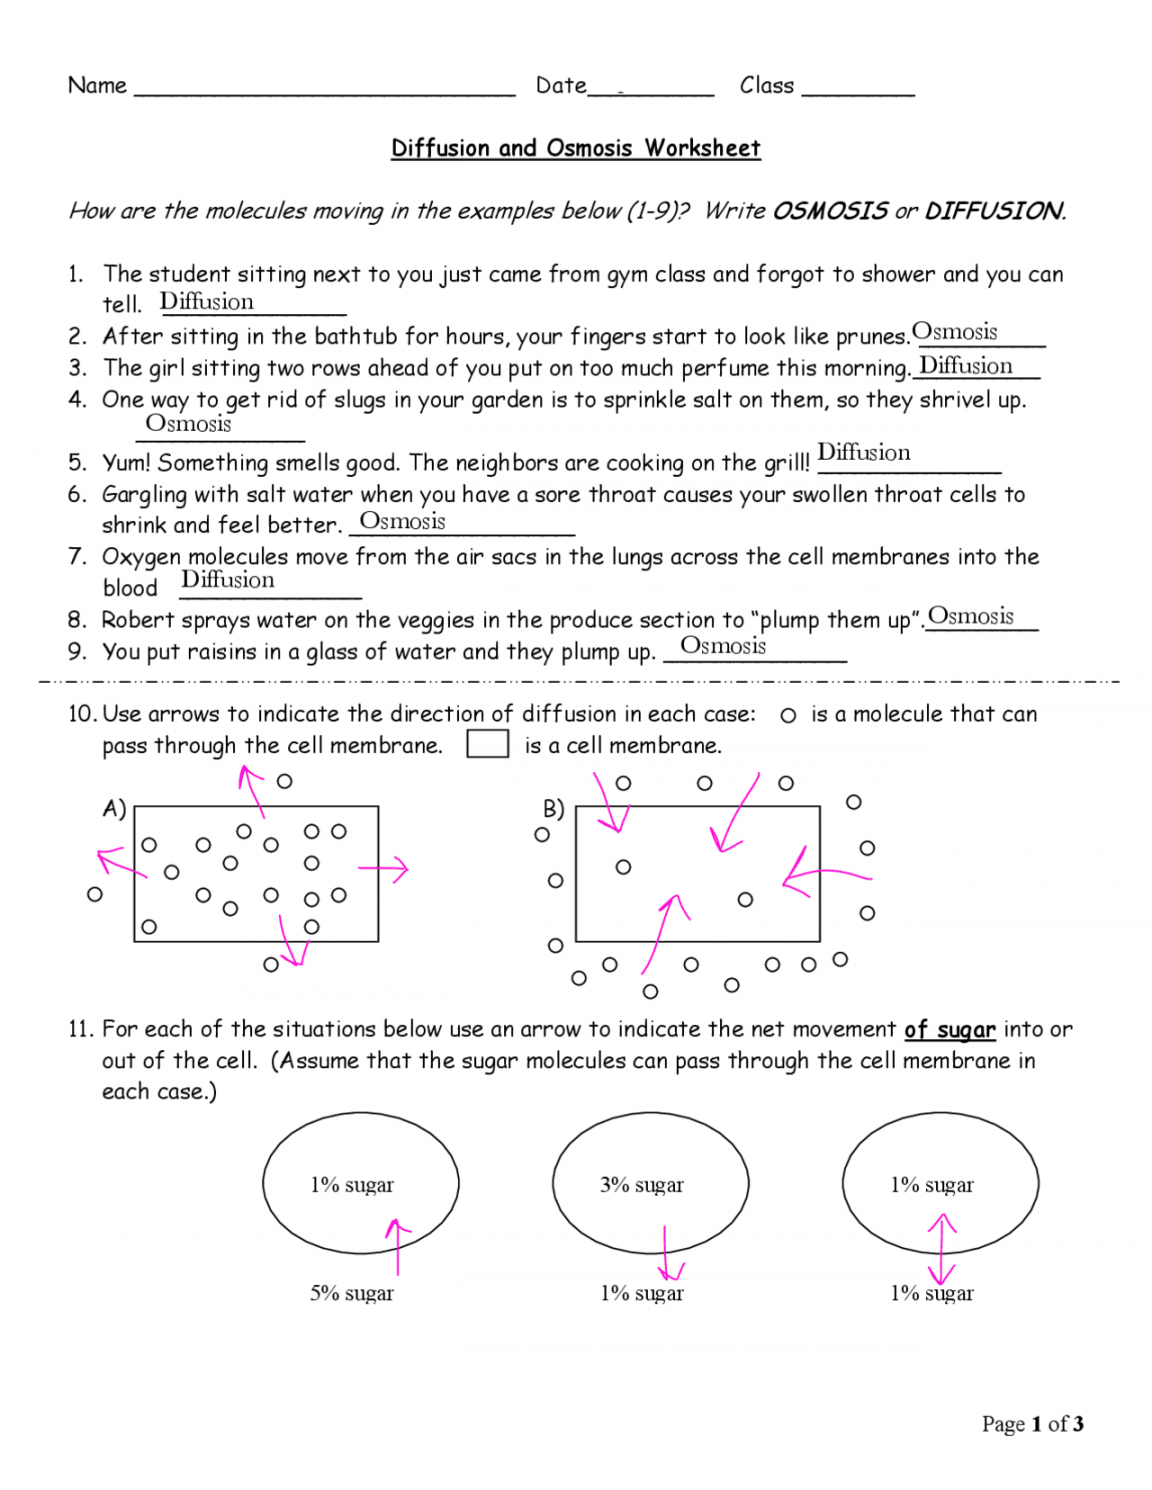 Diffusion and Osmosis Worksheet with Answers  Exercises Biology